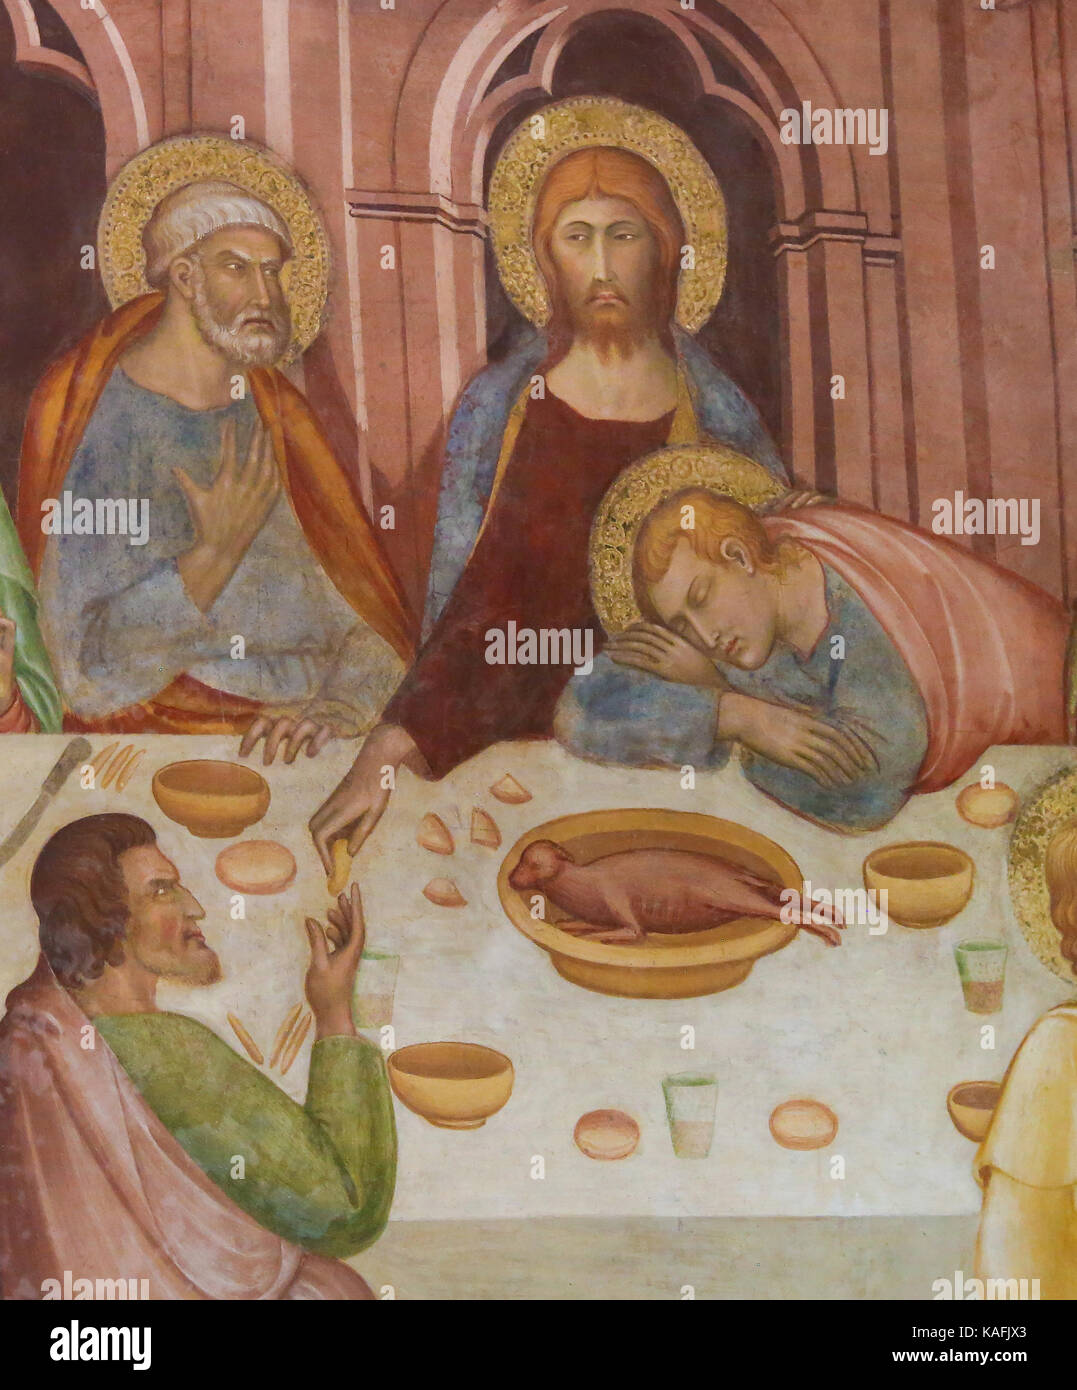 Renaissance Fresco depicting Jesus and the Apostles at the Last Supper, in the Collegiata of San Gimignano, Italy. Stock Photo